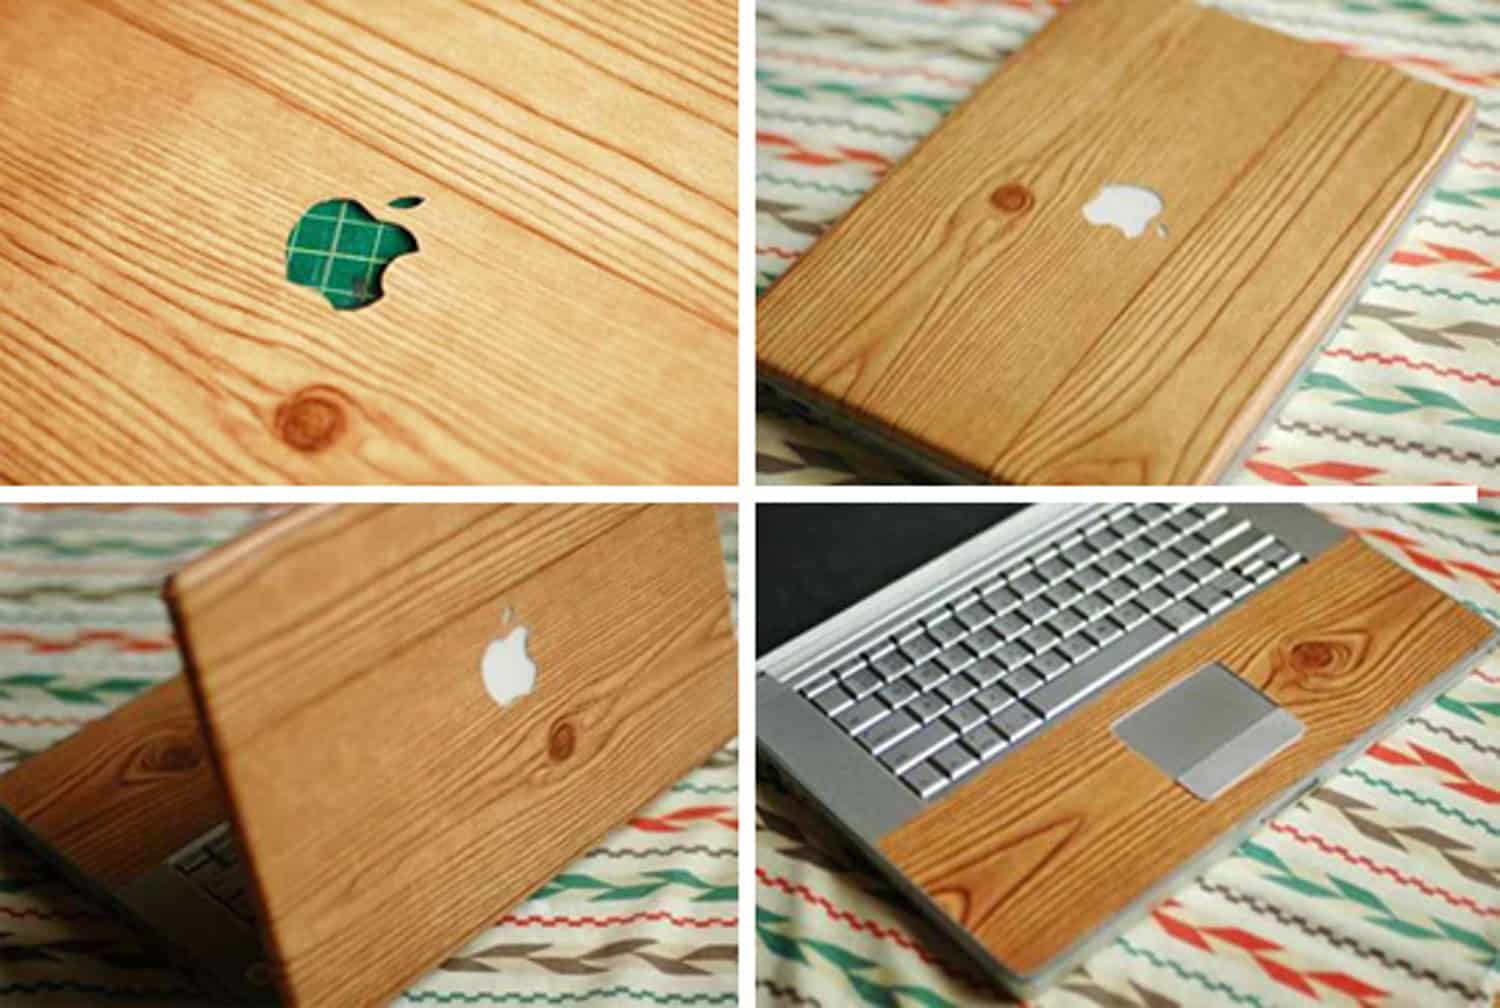 Wood grain in contact with notebook leather